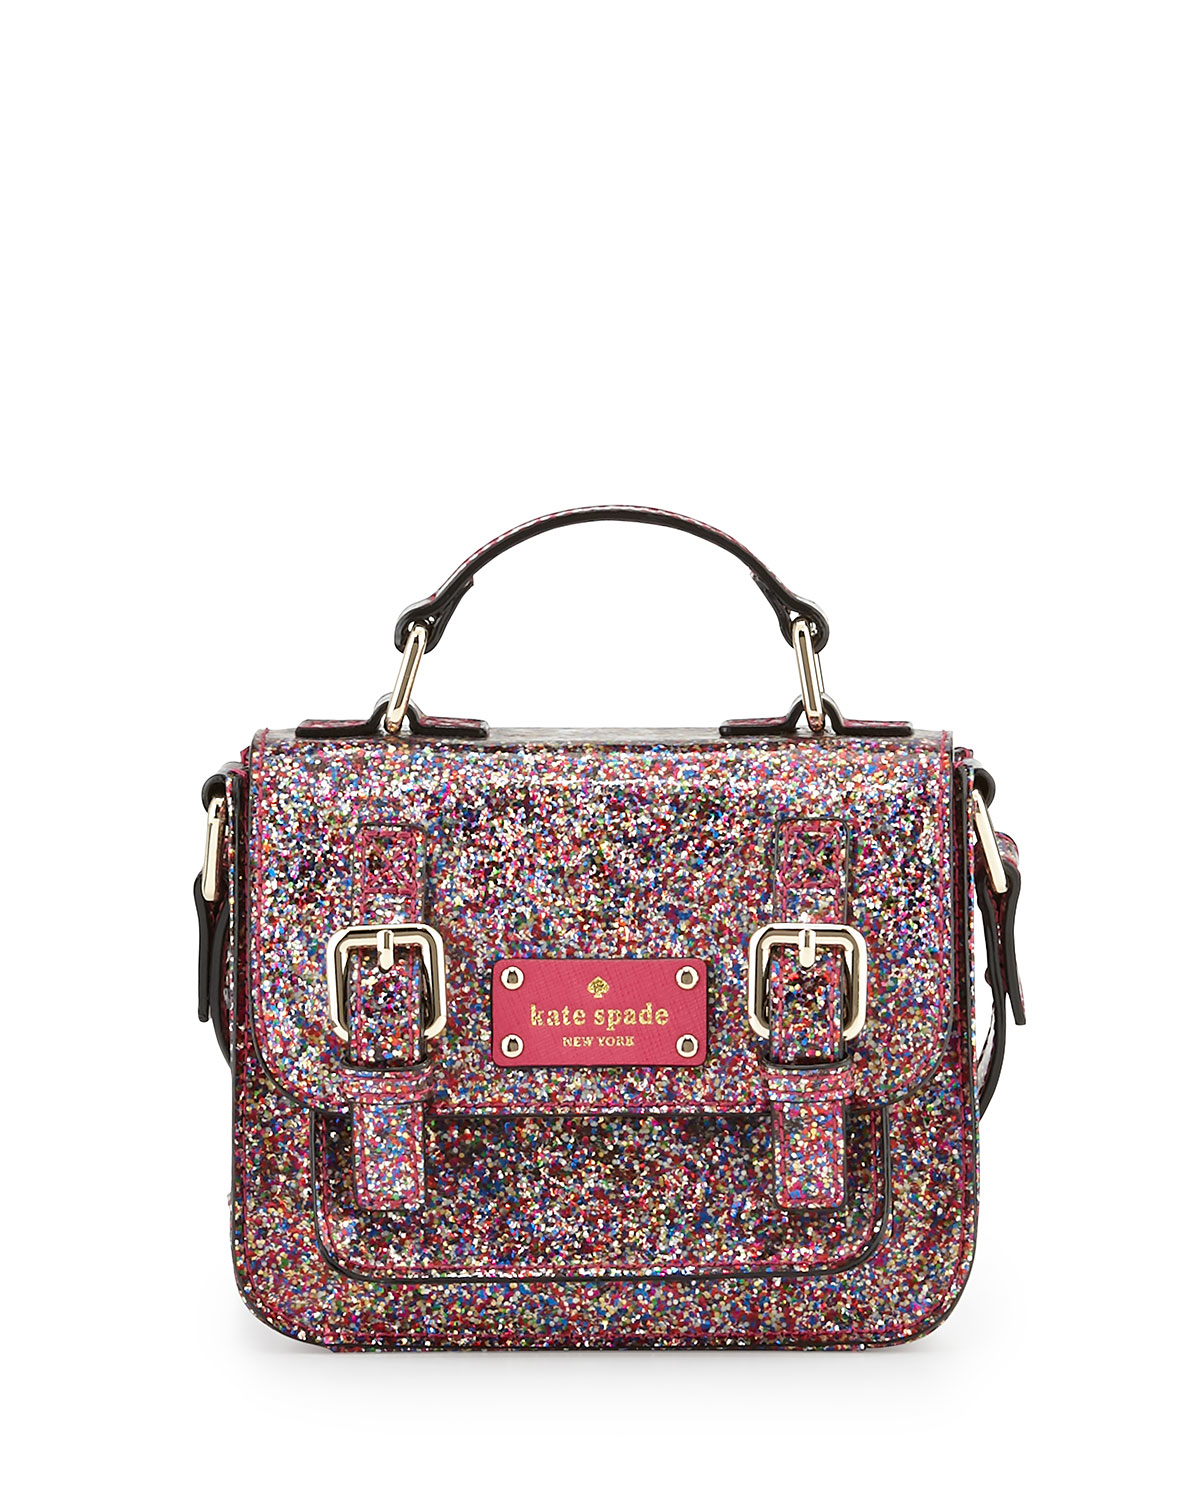 Kate spade new york Scout Patent-Leather Glitter Bag | Lyst